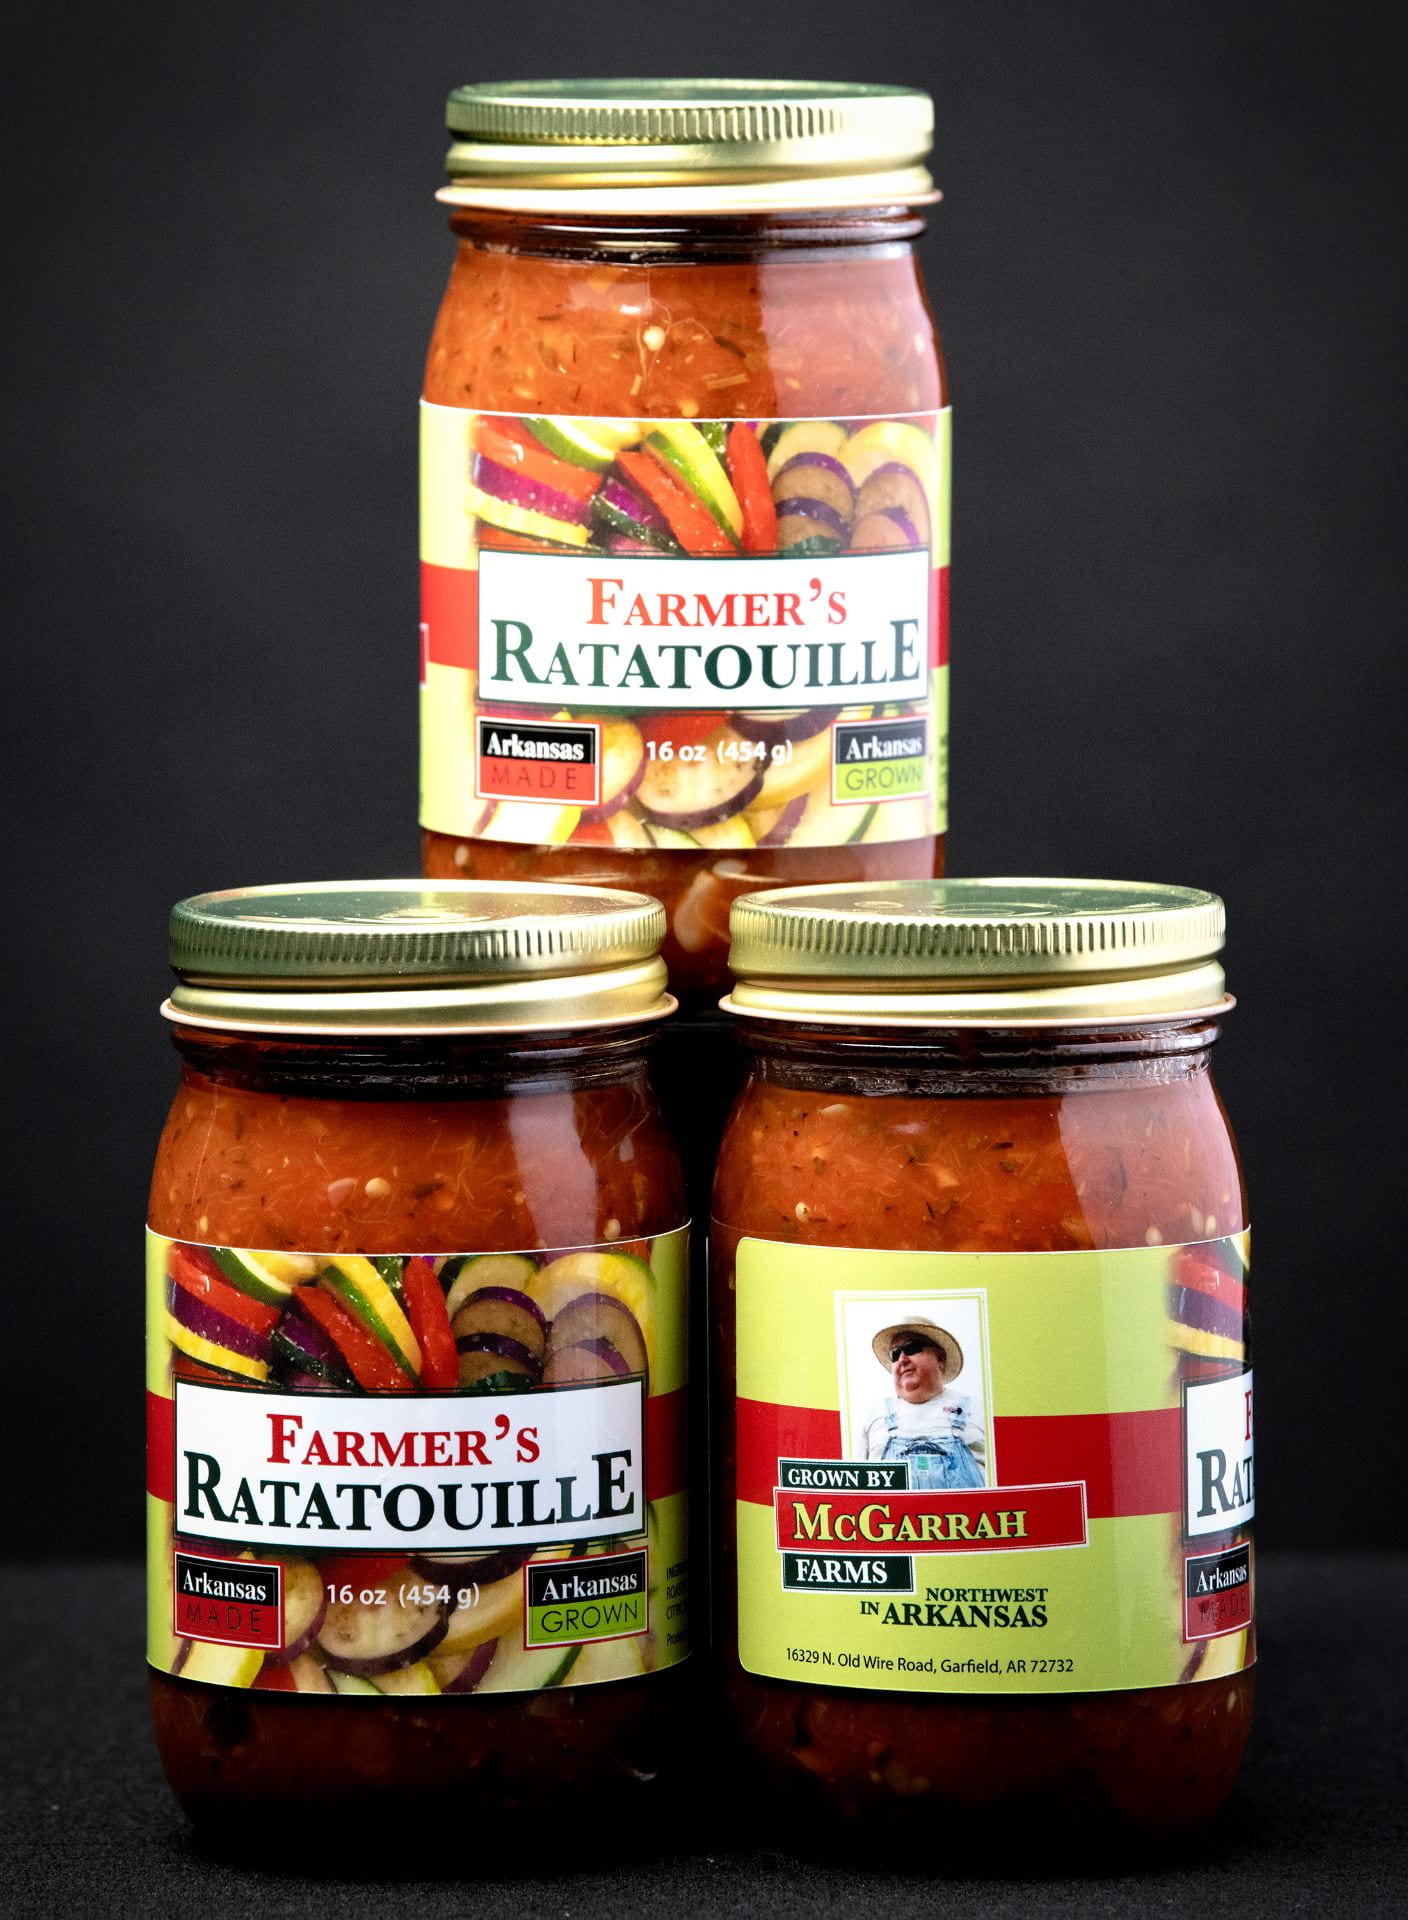 Stack of three jars of a product called Farmer's Ratatouille in front of a black background